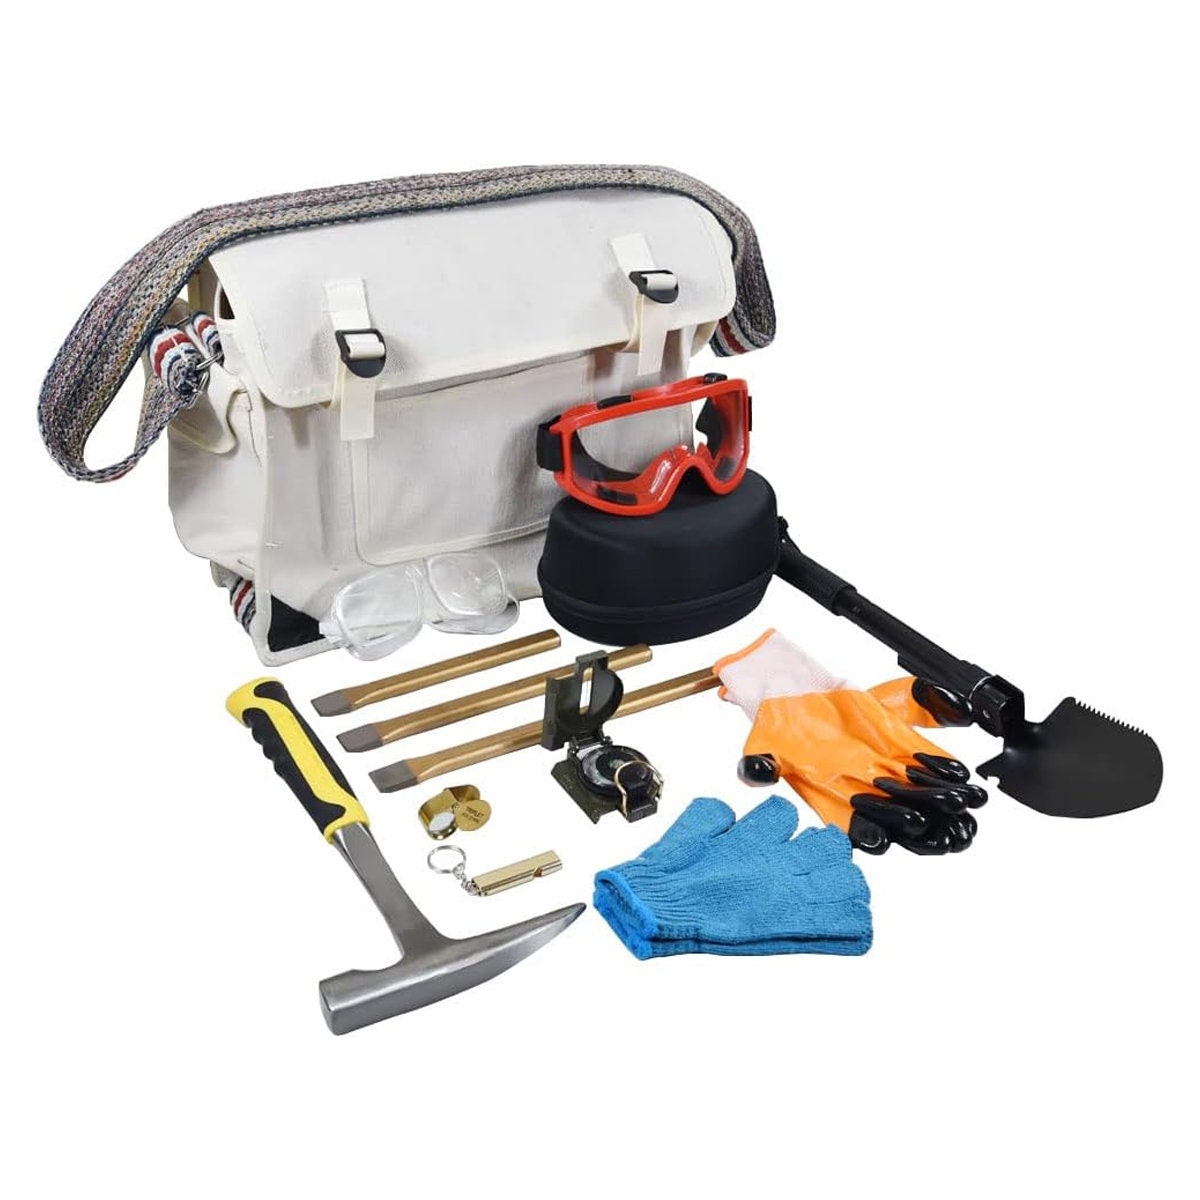 ASR Outdoor 38pc Deluxe Geology Rock Hounding Kit with Mining Tools and  Carry Bag